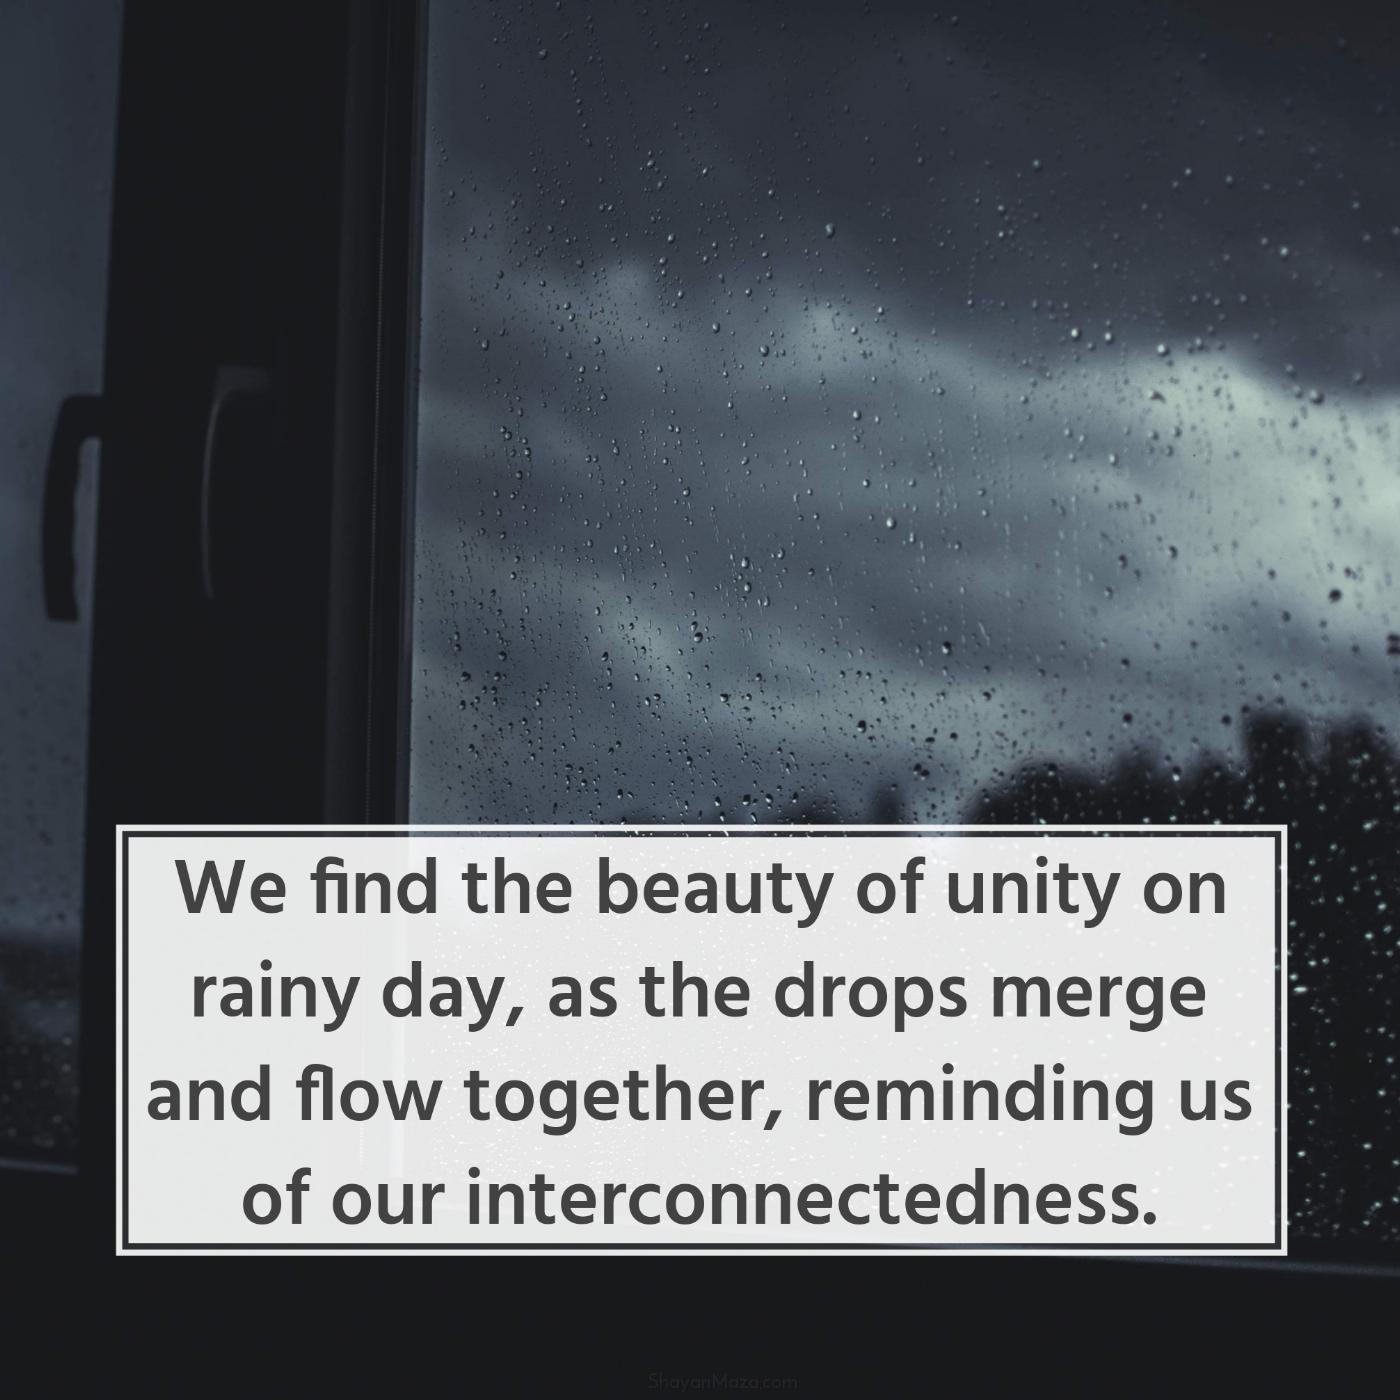 We find the beauty of unity on rainy day as the drops merge